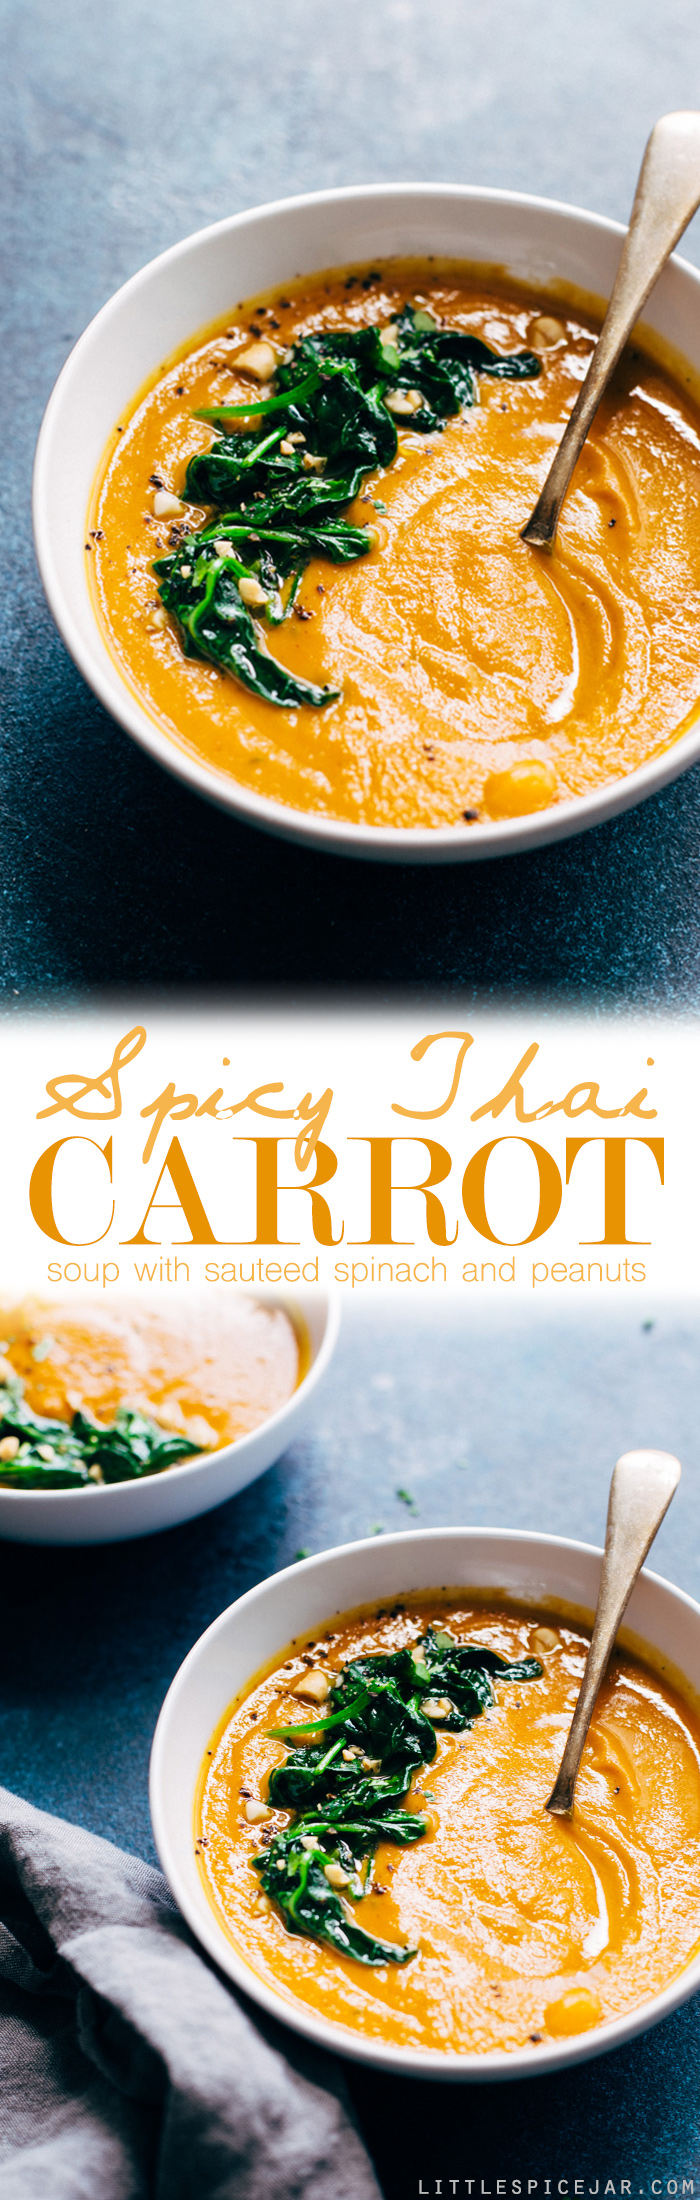 Spicy Thai Carrot Soup - a warm and cozy bowl of soup loaded with lots of veggies and is completely vegan friendly and dairy-free! #vegan #dairyfree #carrotsoup #thaicarrotsoup | Littlespicejar.com